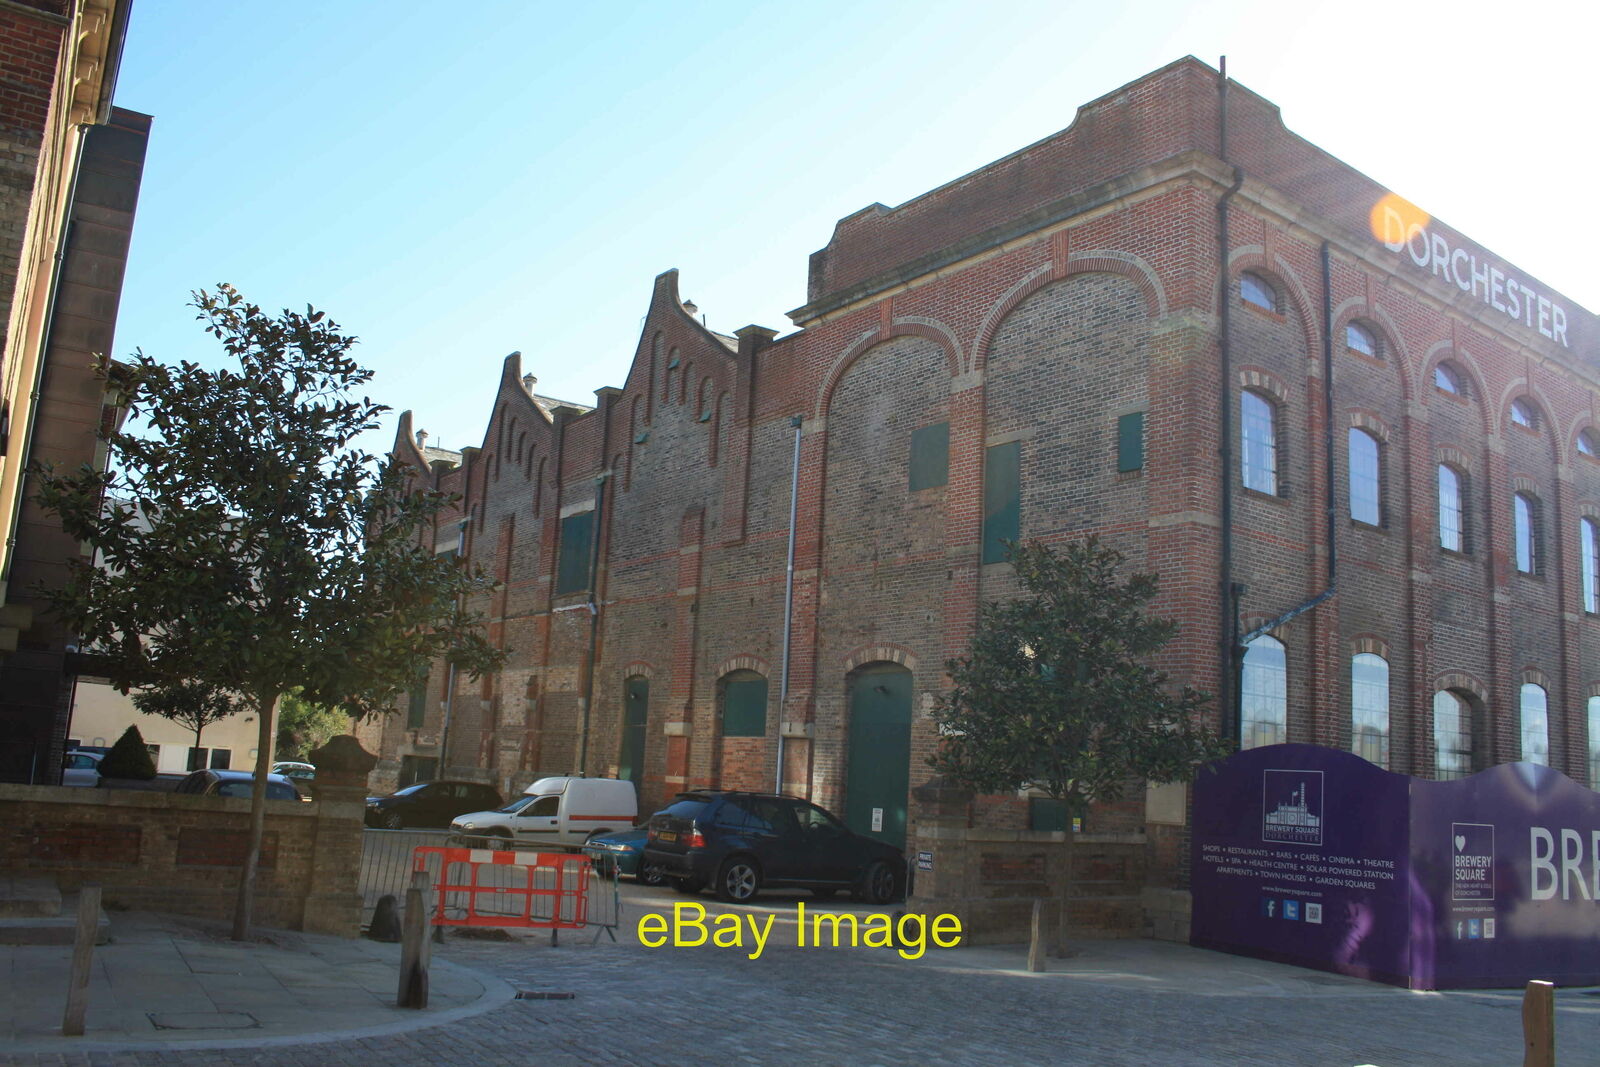 Photo 12x8 Brewery Square Old Brewery building Dorchester  c2013